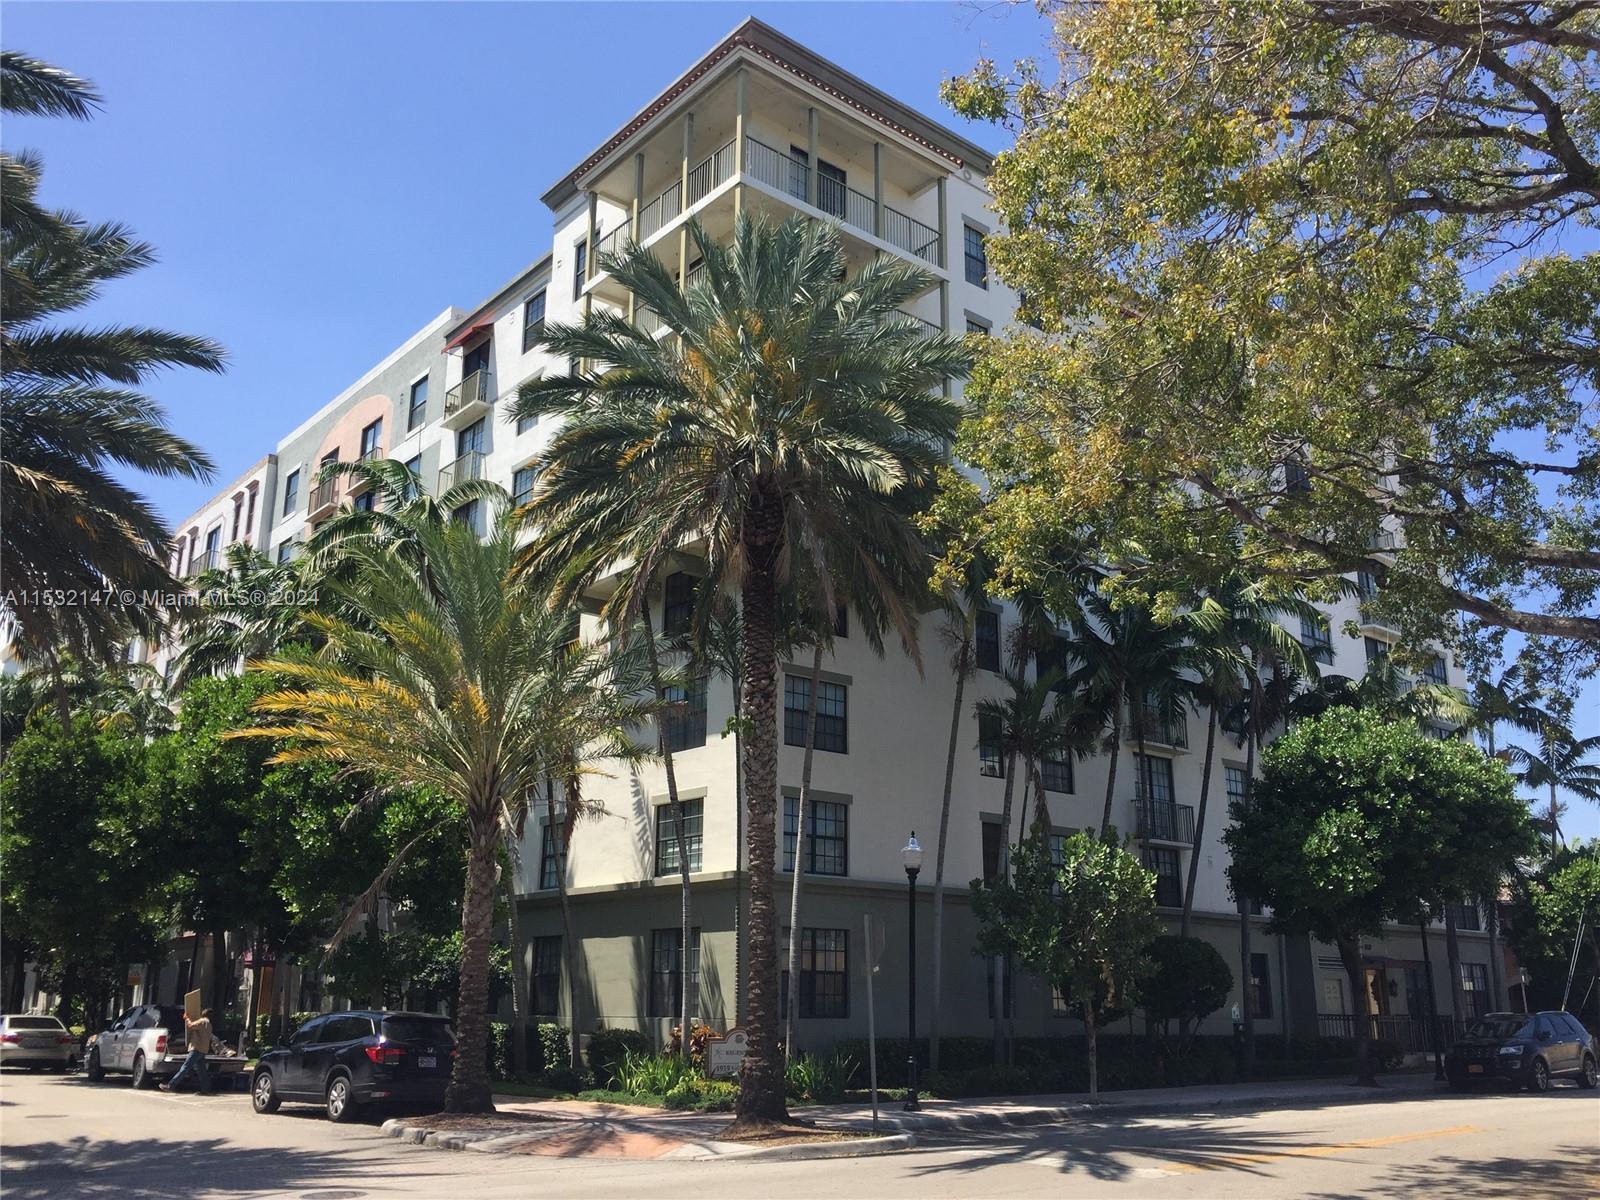 LARGEST ONE BEDROOM CONDO AT REGENT PARK IN DOWNTOWN HOLLYWOOD, CORNER UNIT WITH WASHER AND DRYER IN